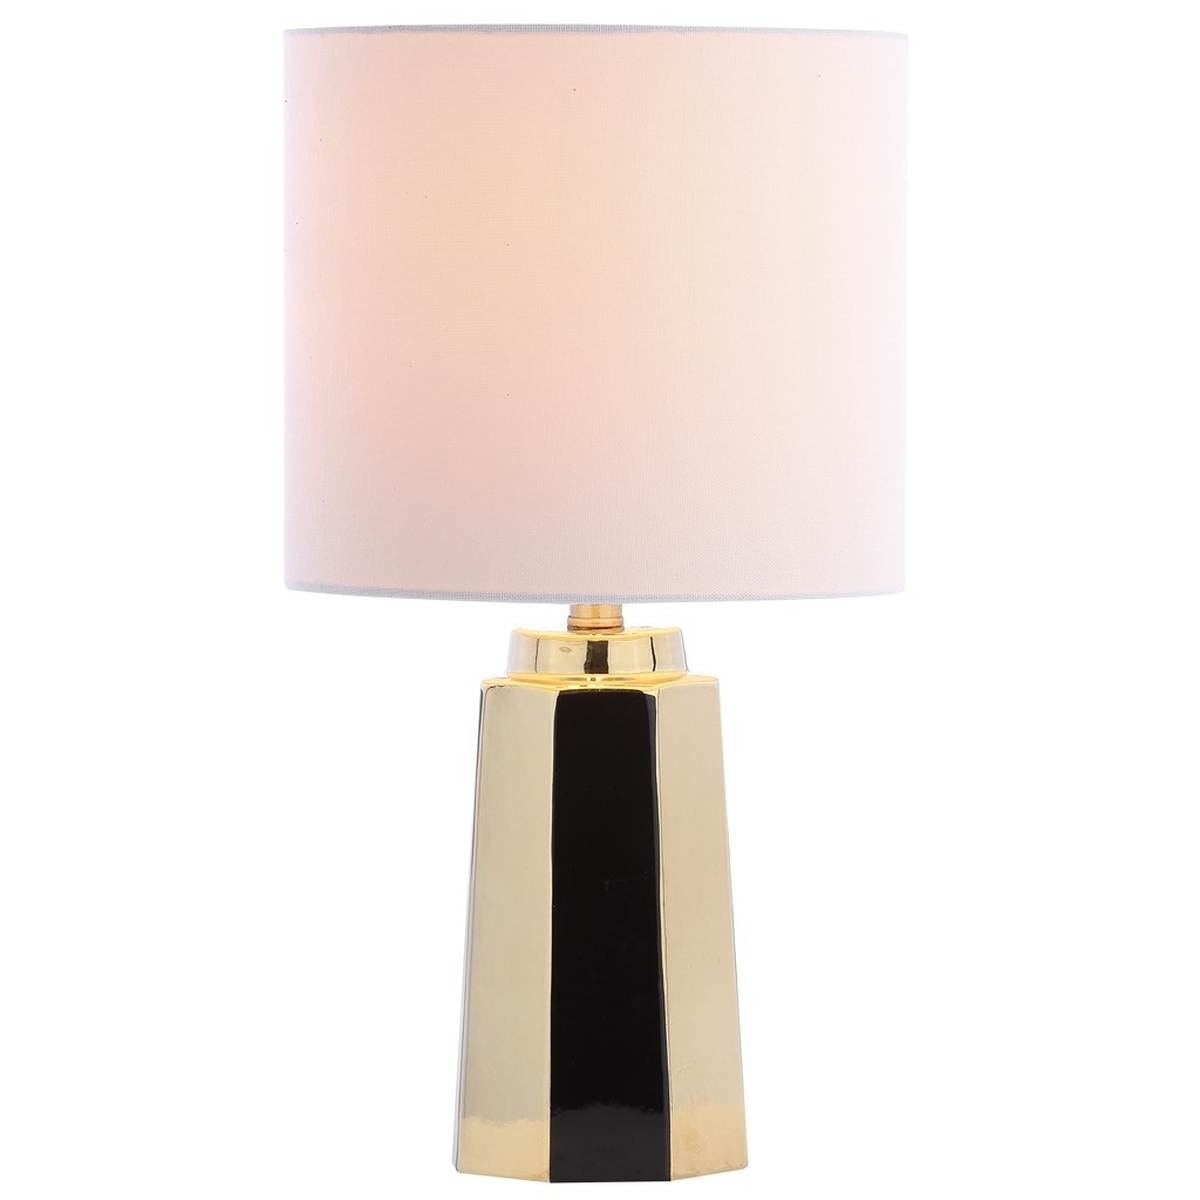 Parlon Table Lamp - Plated Gold - Safavieh - Image 1